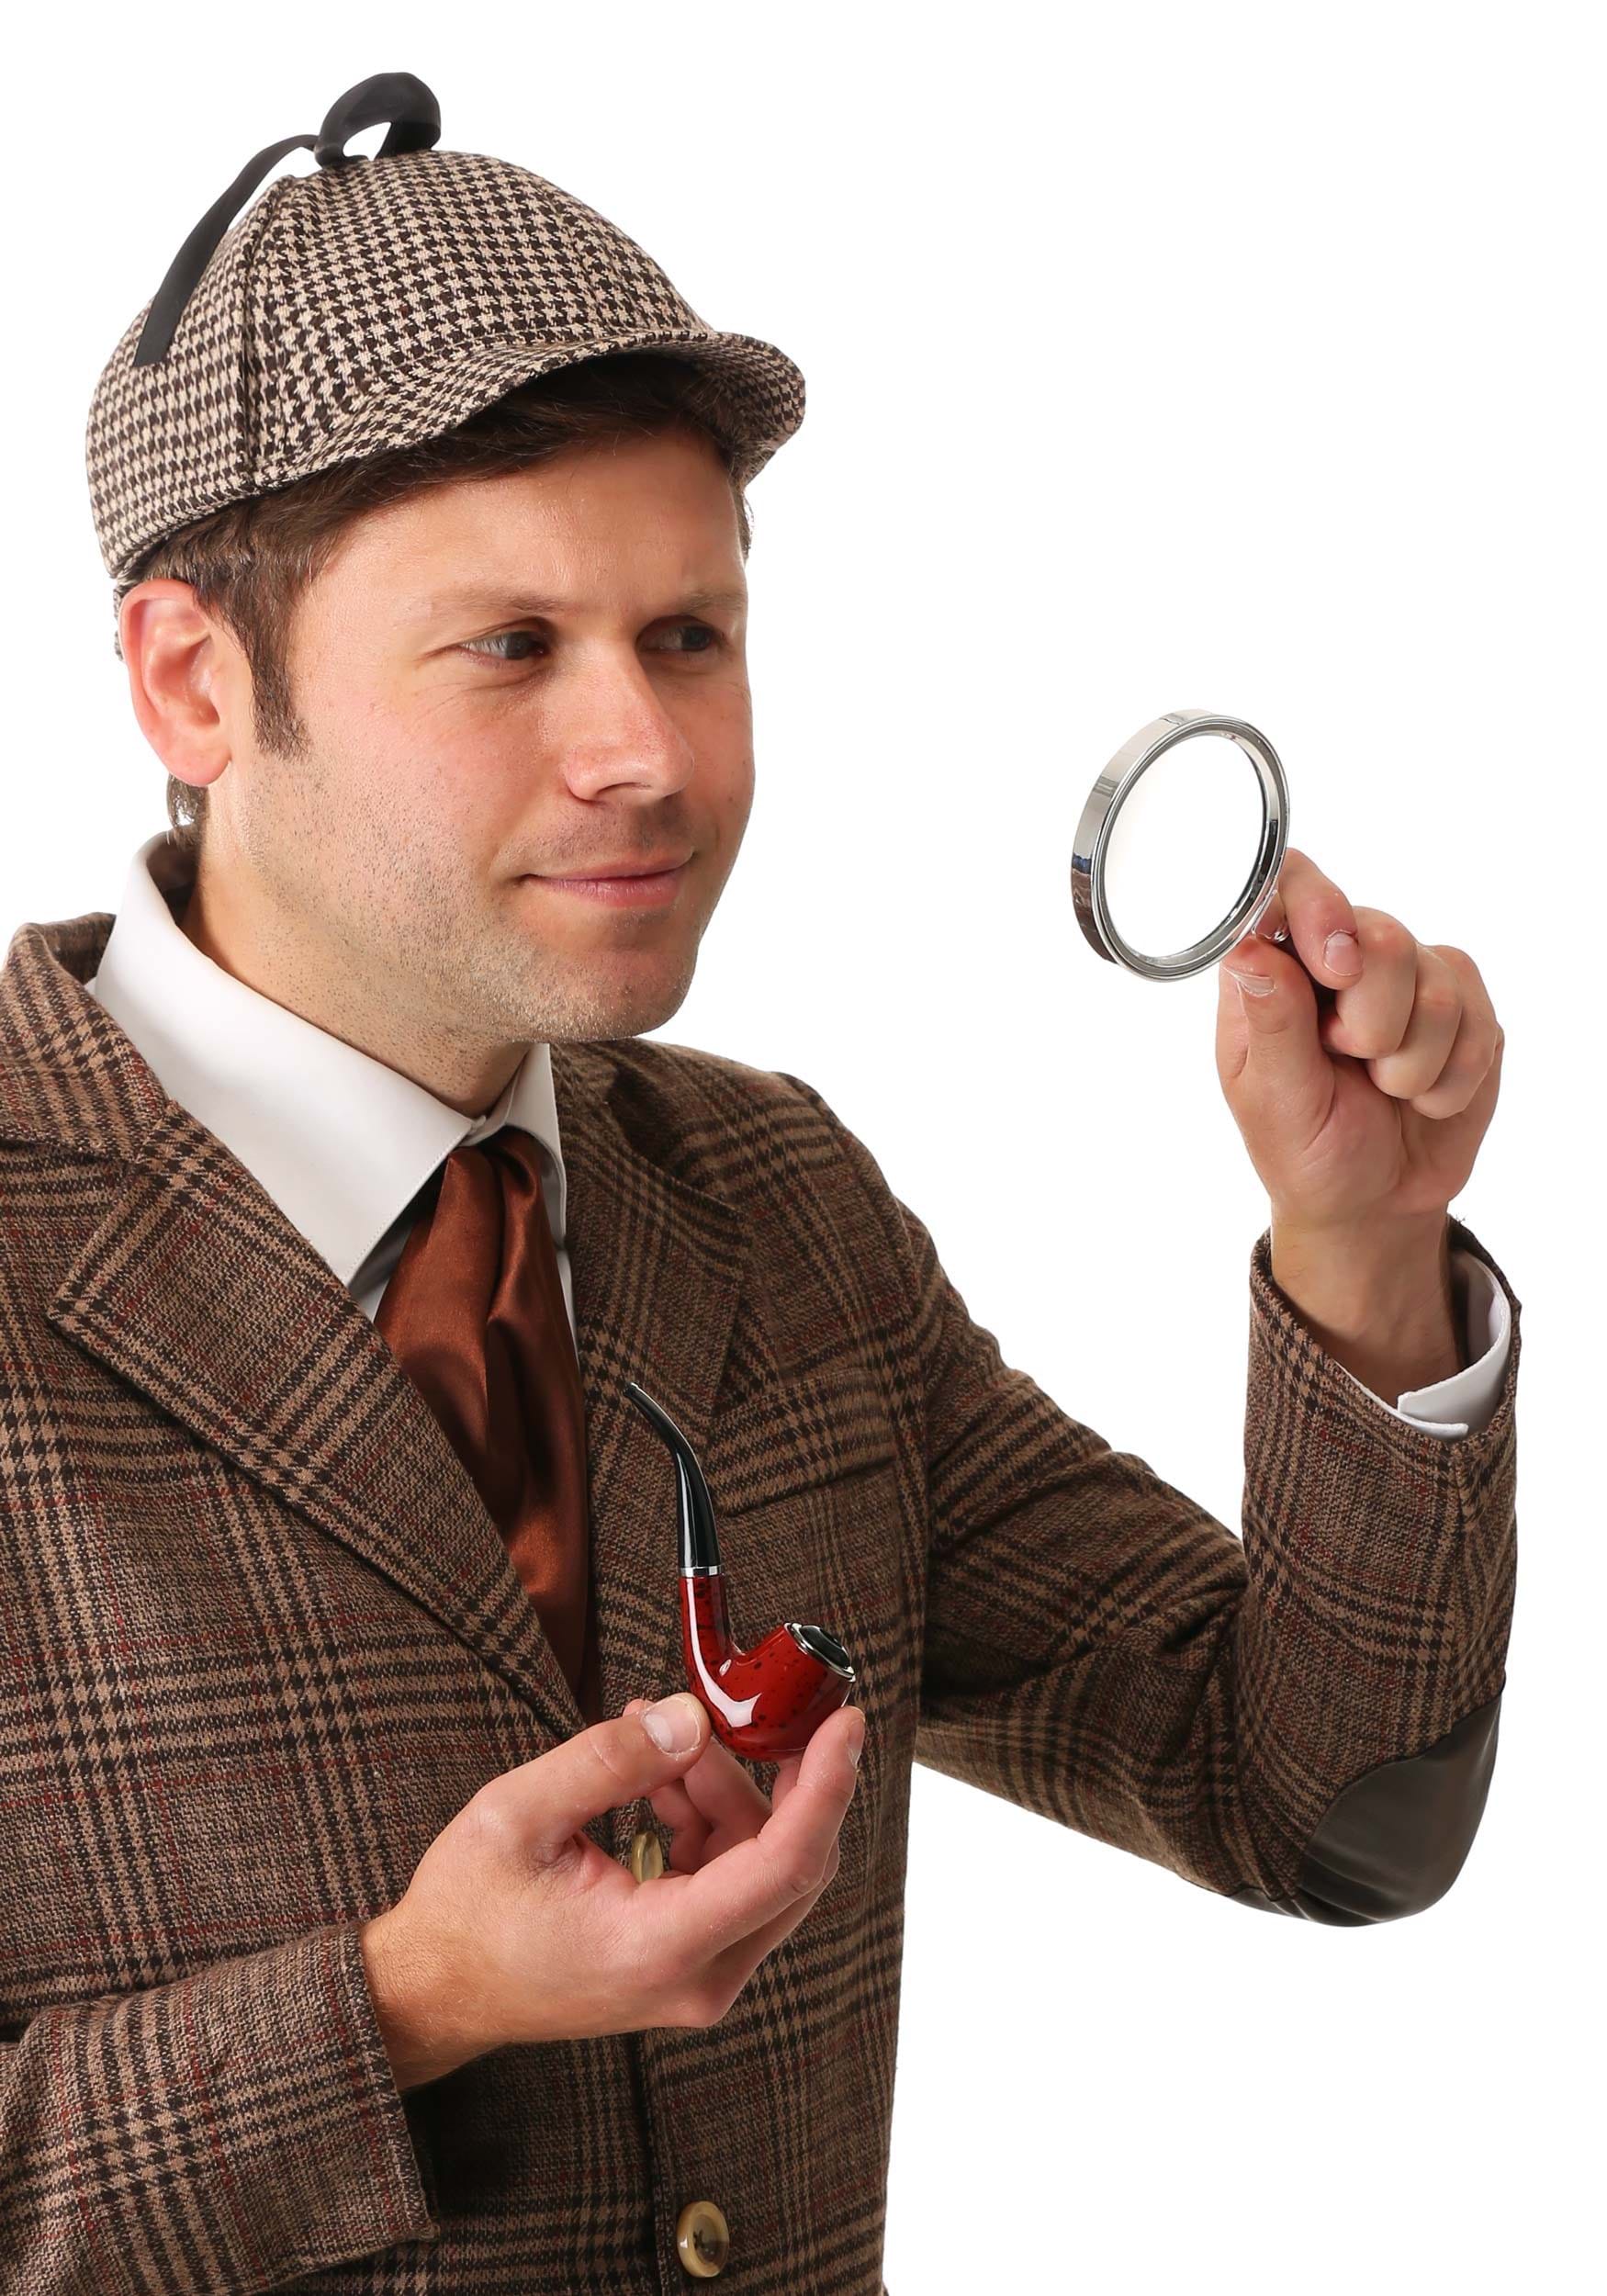 https://images.halloweencostumes.ca/products/46207/1-1/spy-detective-accessory-kit.jpg